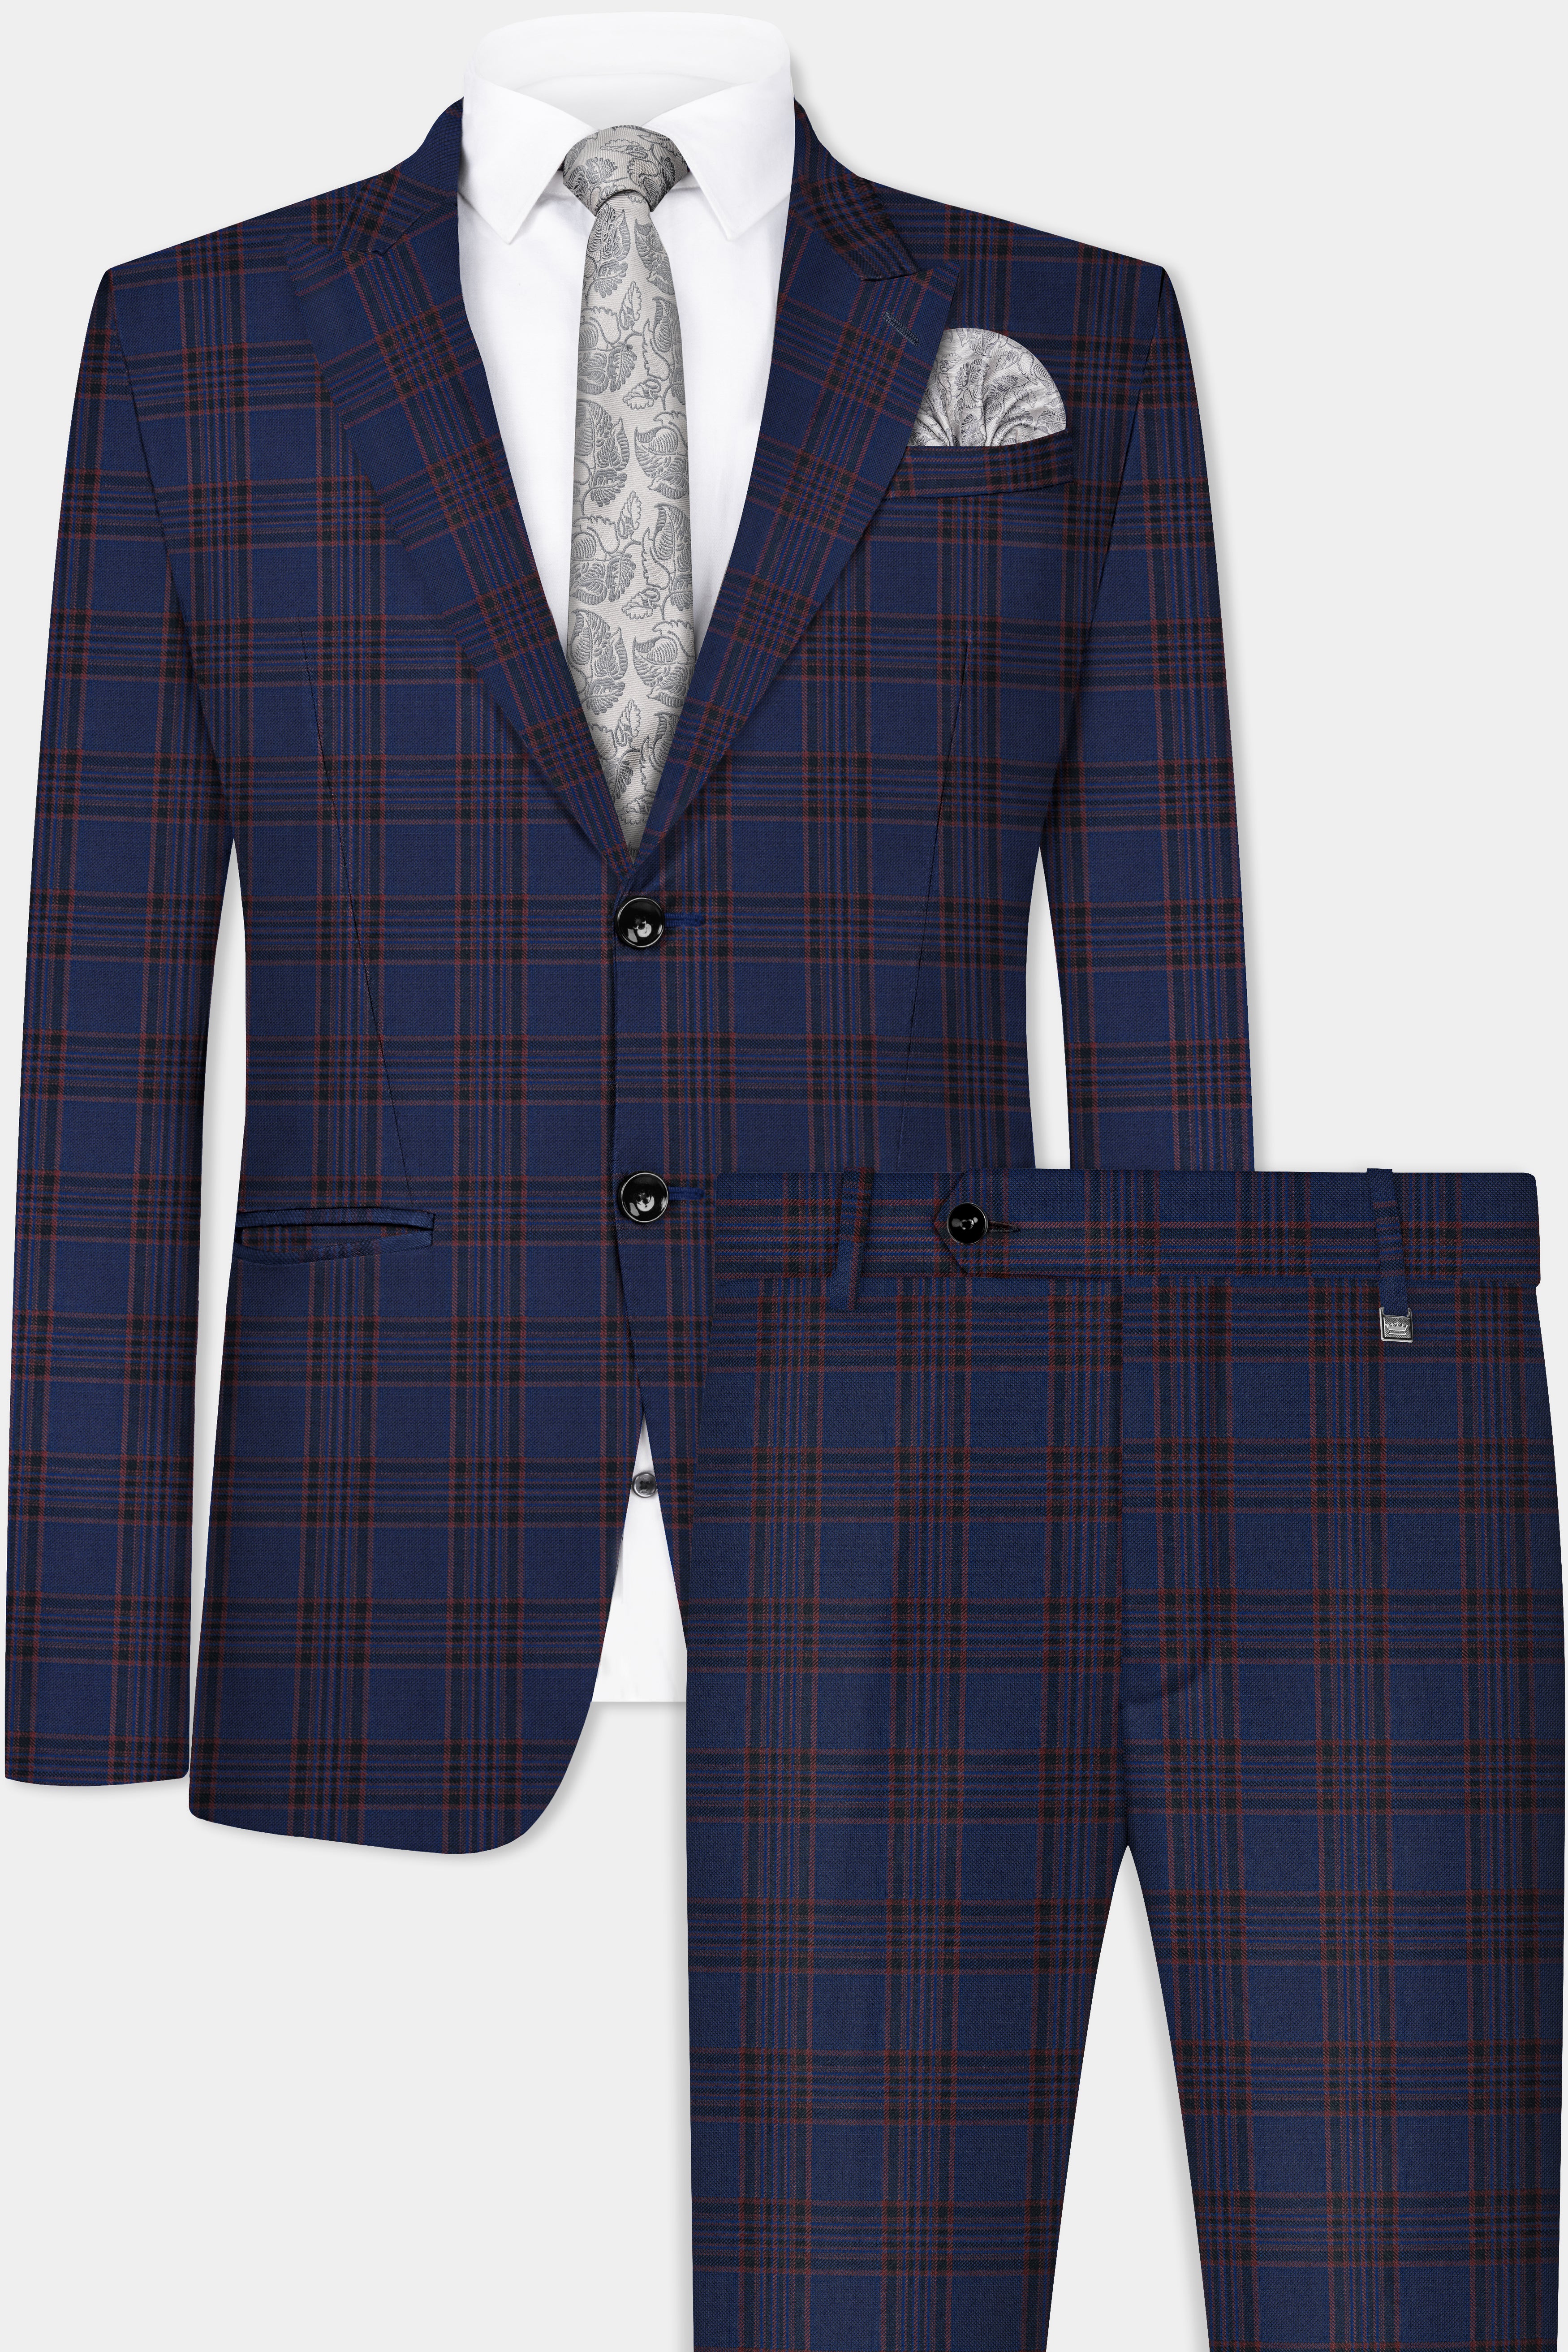 Bunting Blue with Livid Brown Plaid Wool Blend Tuxedo Suit